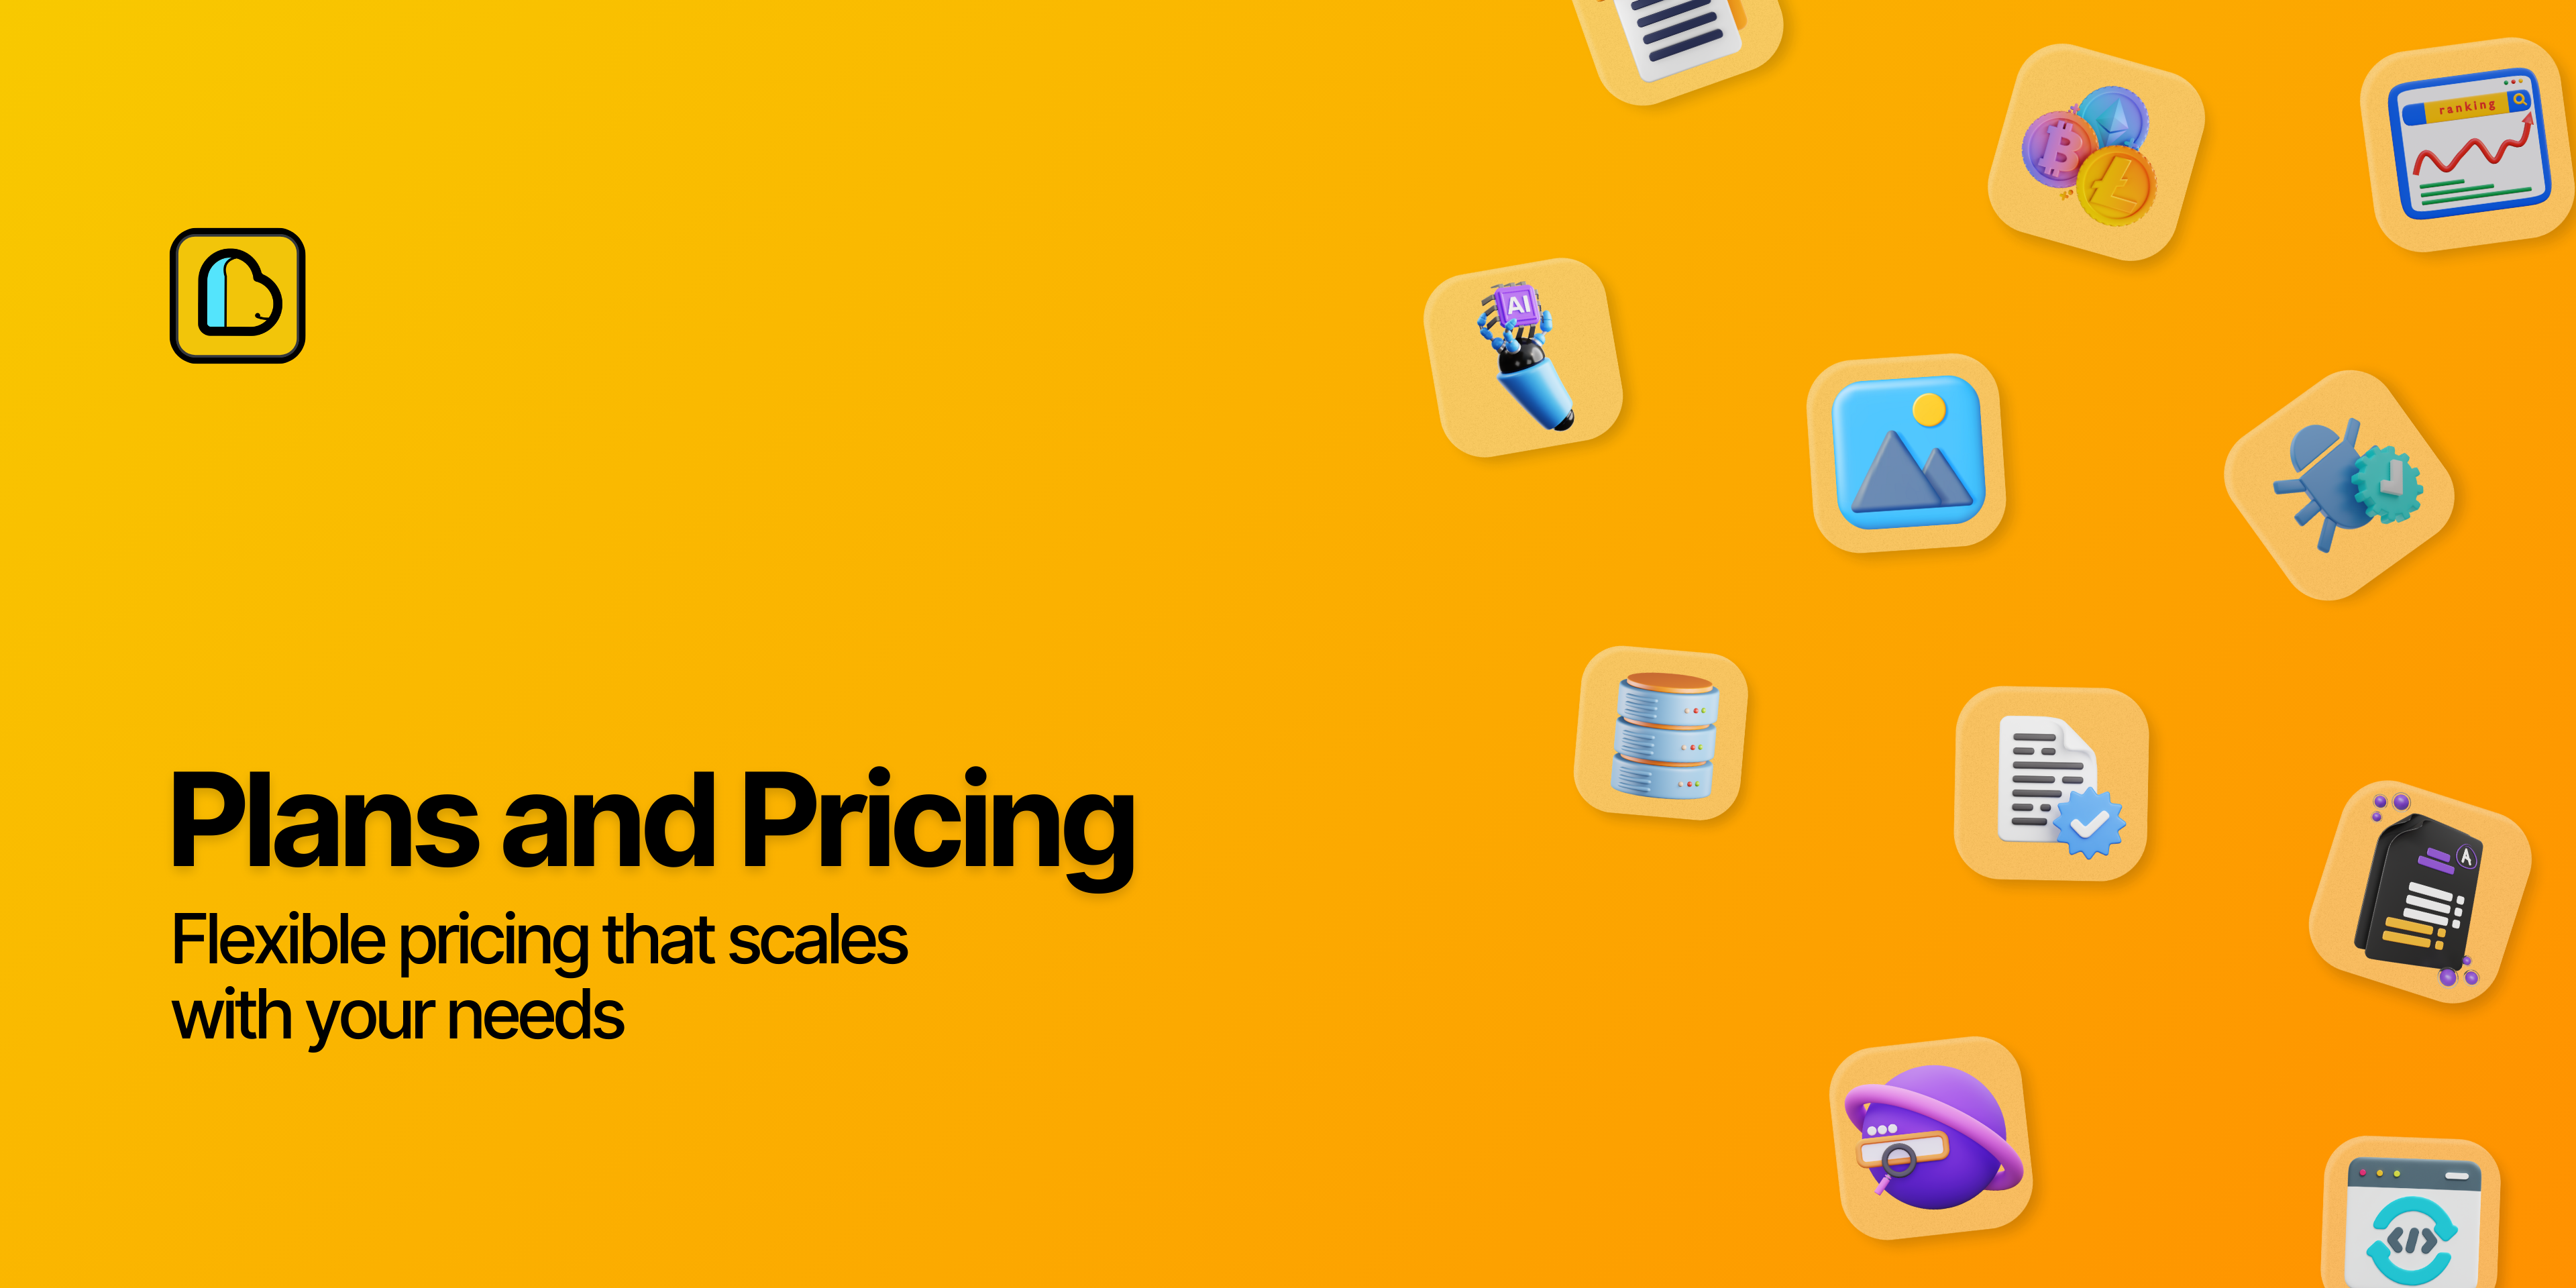 New Pricing Update